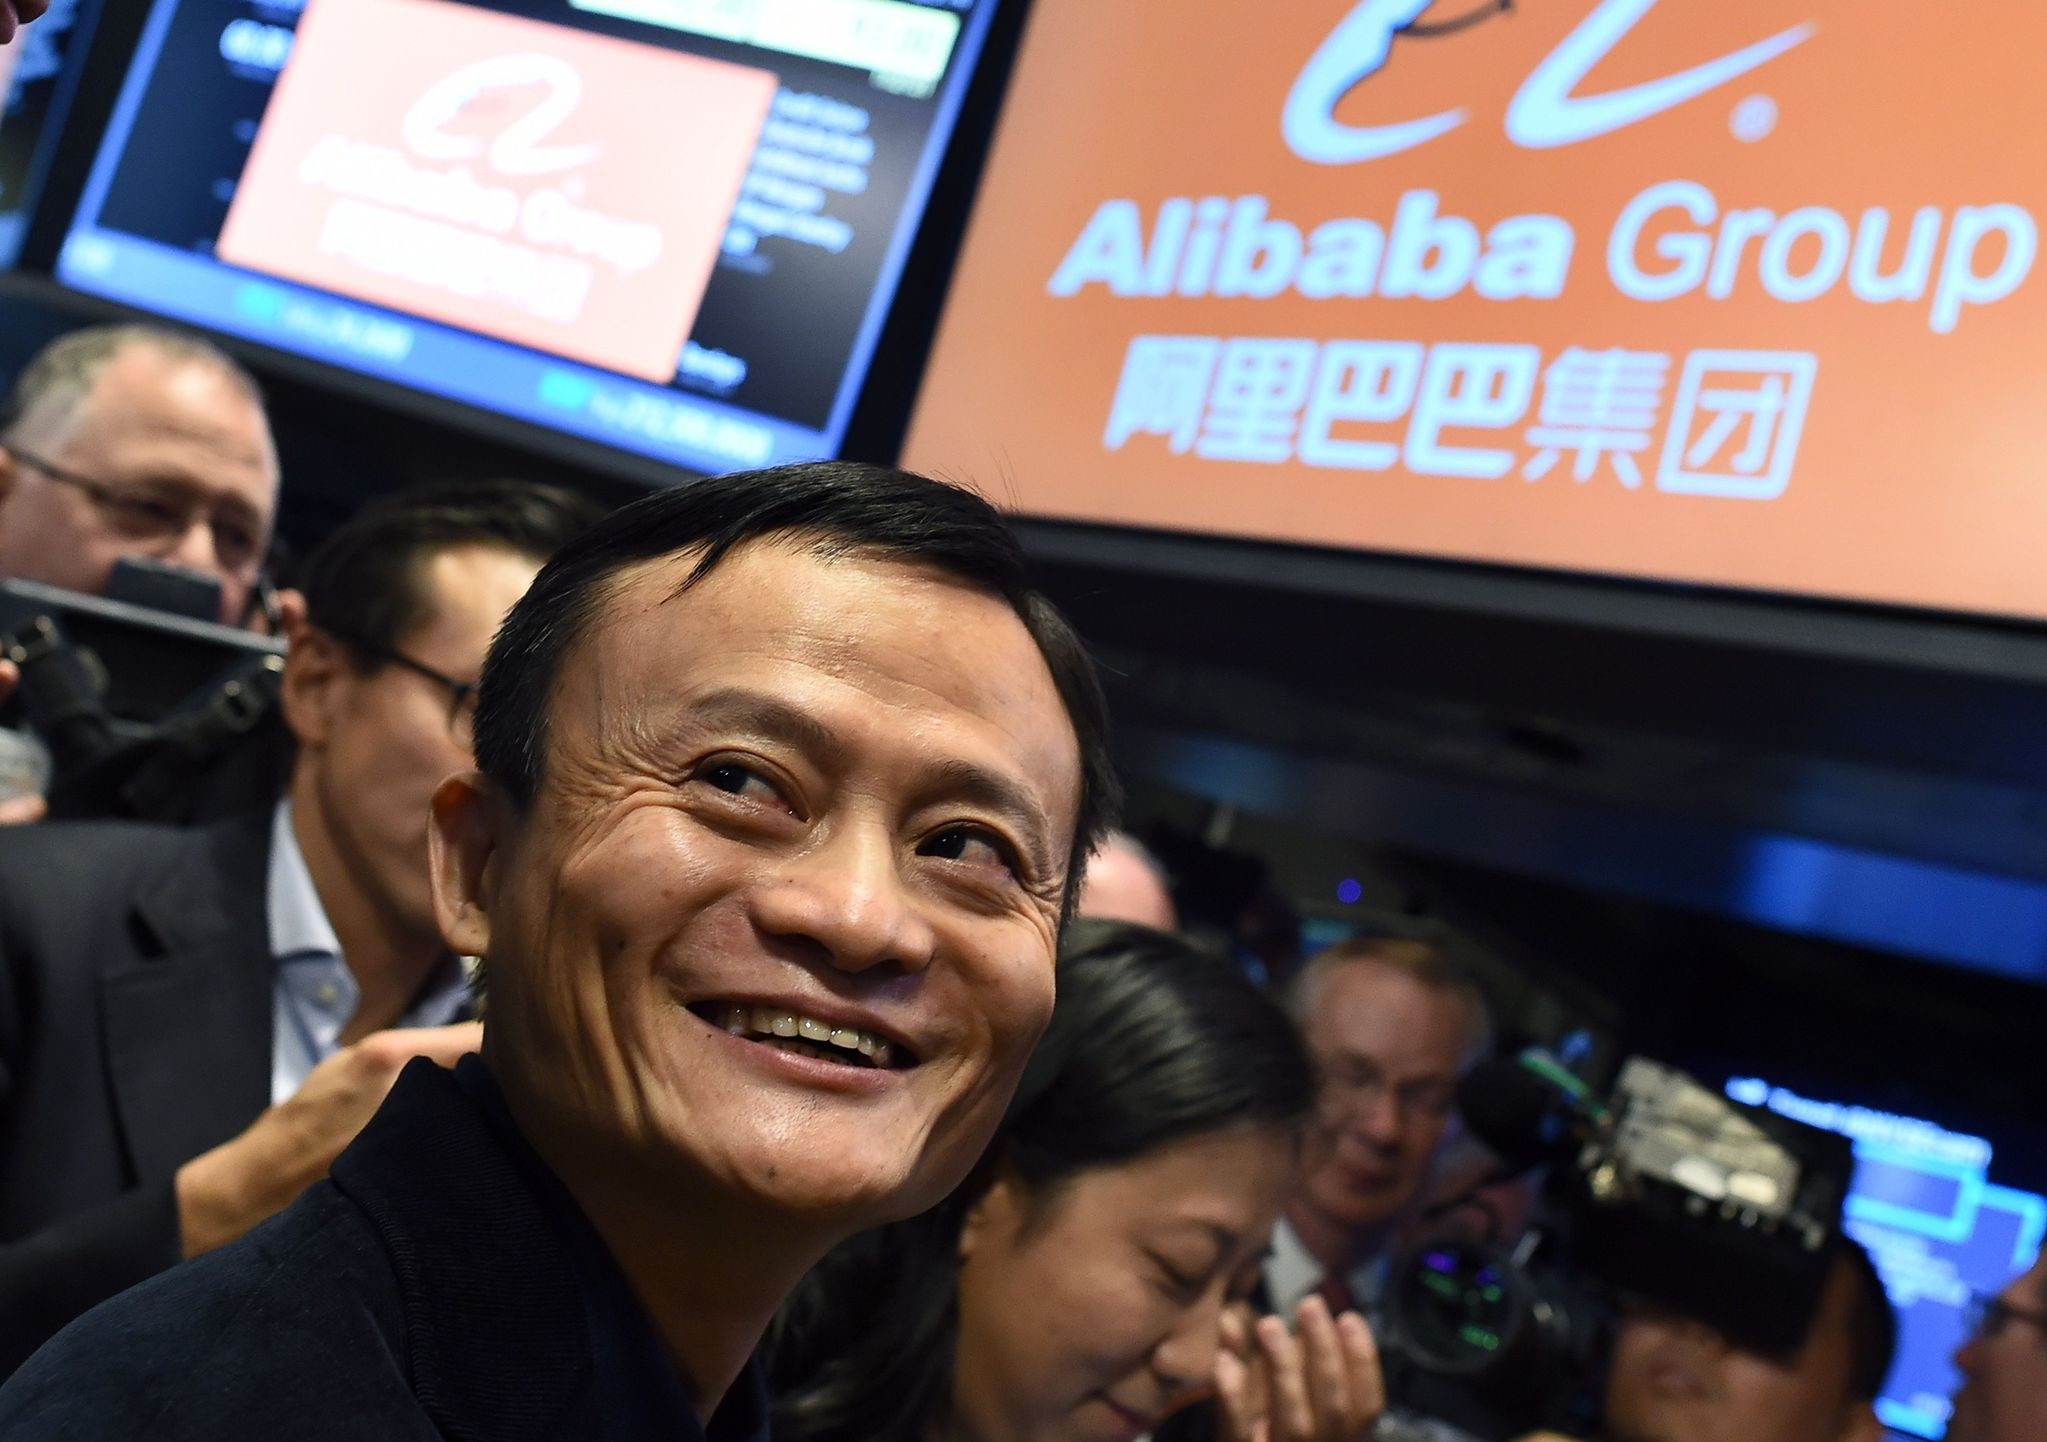 This file photo taken on September 19, 2014 shows Chinese online retail giant Alibaba founder Jack Ma smiling as he waits for the trading to open on the floor at the New York Stock Exchange in New York. (AFP Photo)